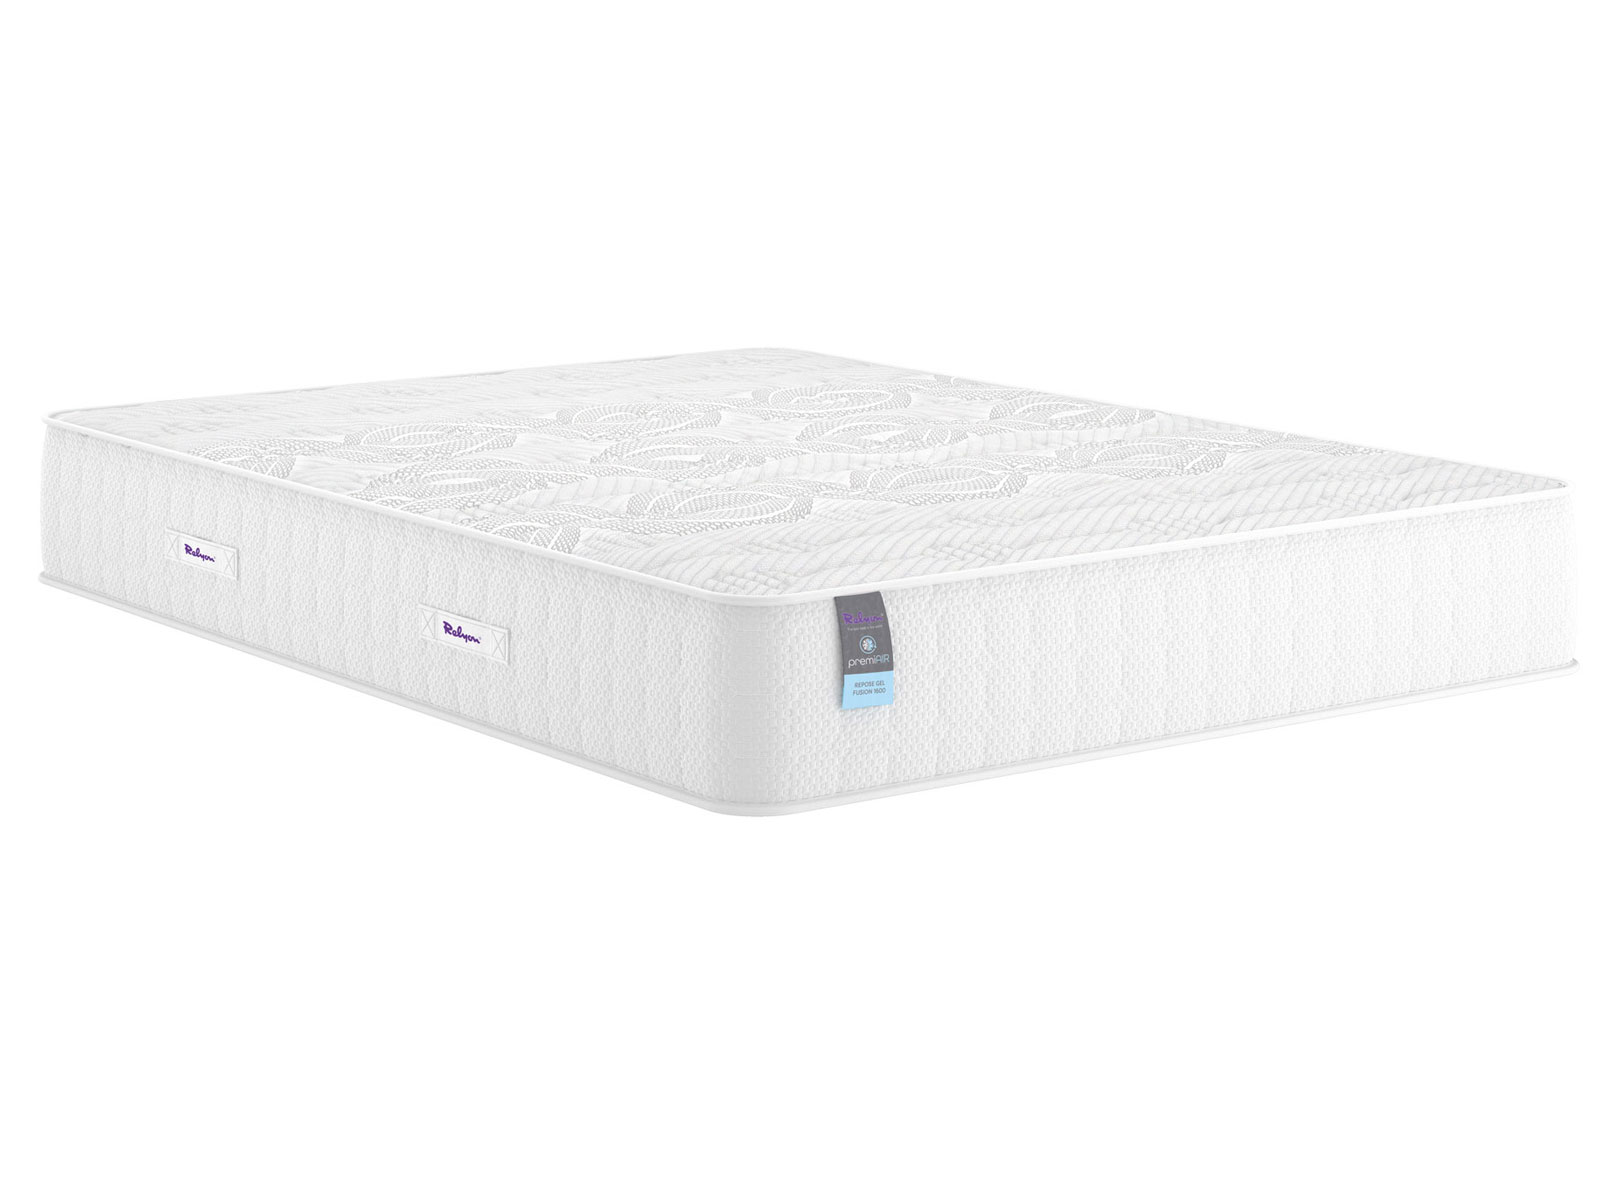 4ft Small Double Relyon Contemporary Gel Fusion 1600 Mattress